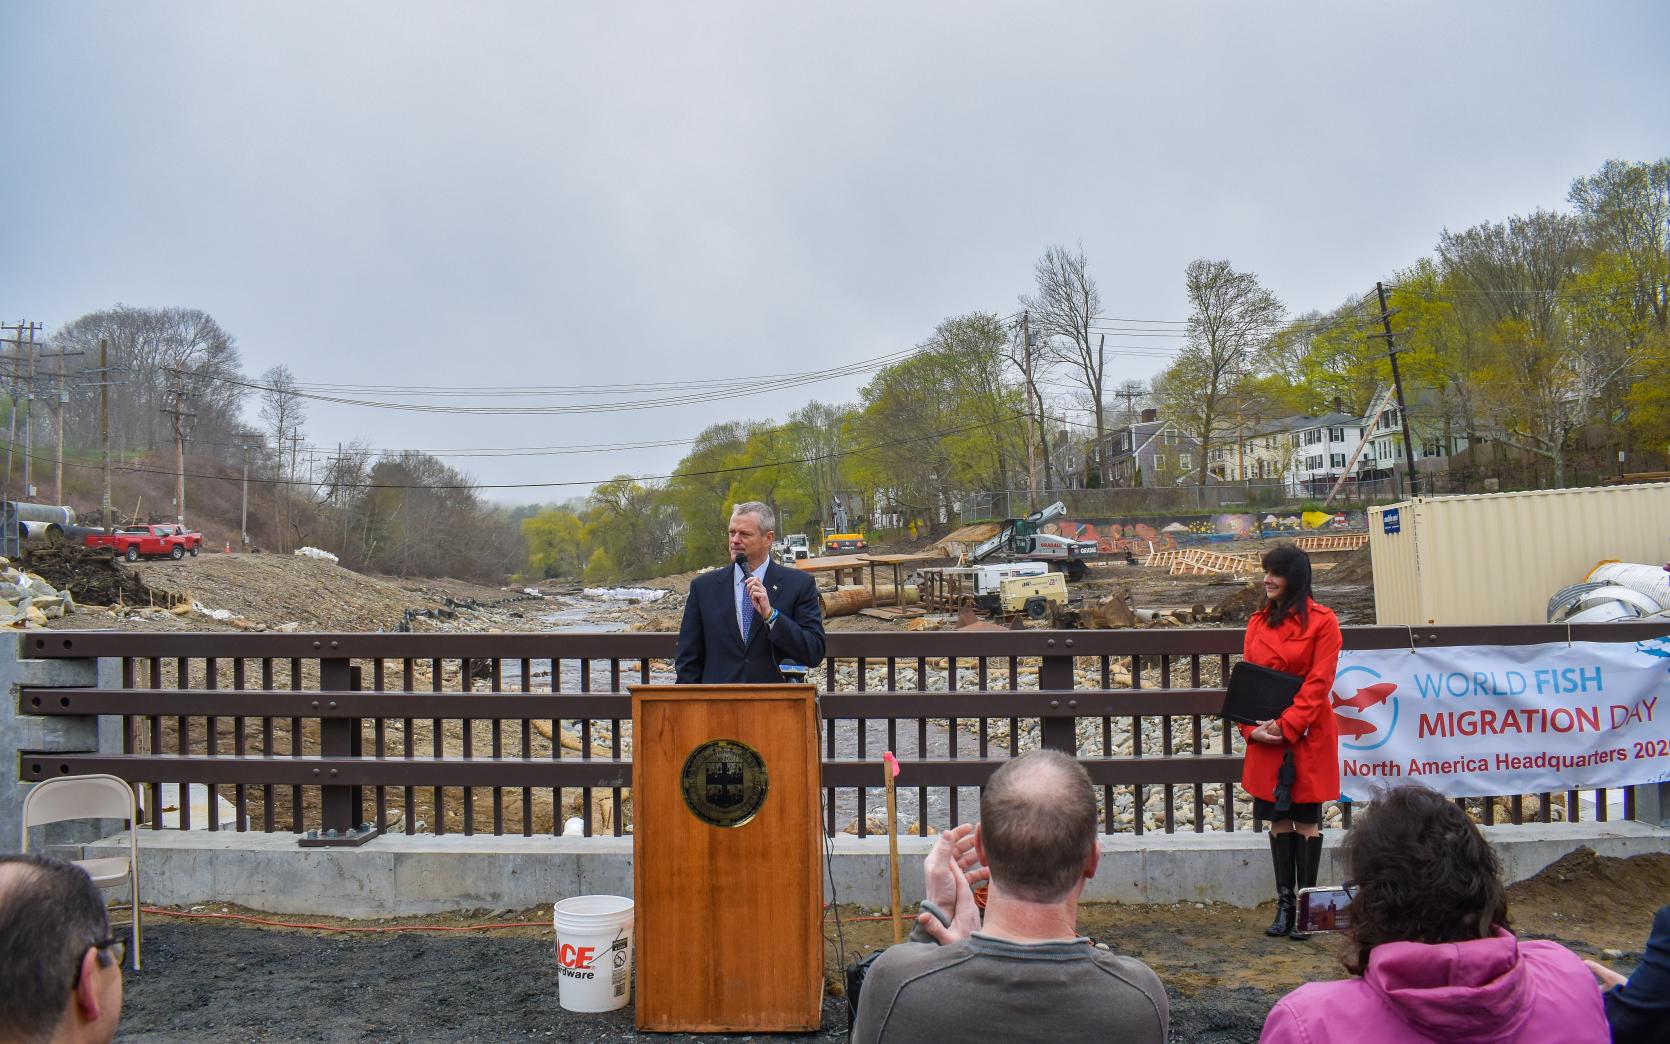 Commonwealth Celebrates Earth Day with Milestone in Climate Change Planning Program, Local Dam Removal Project